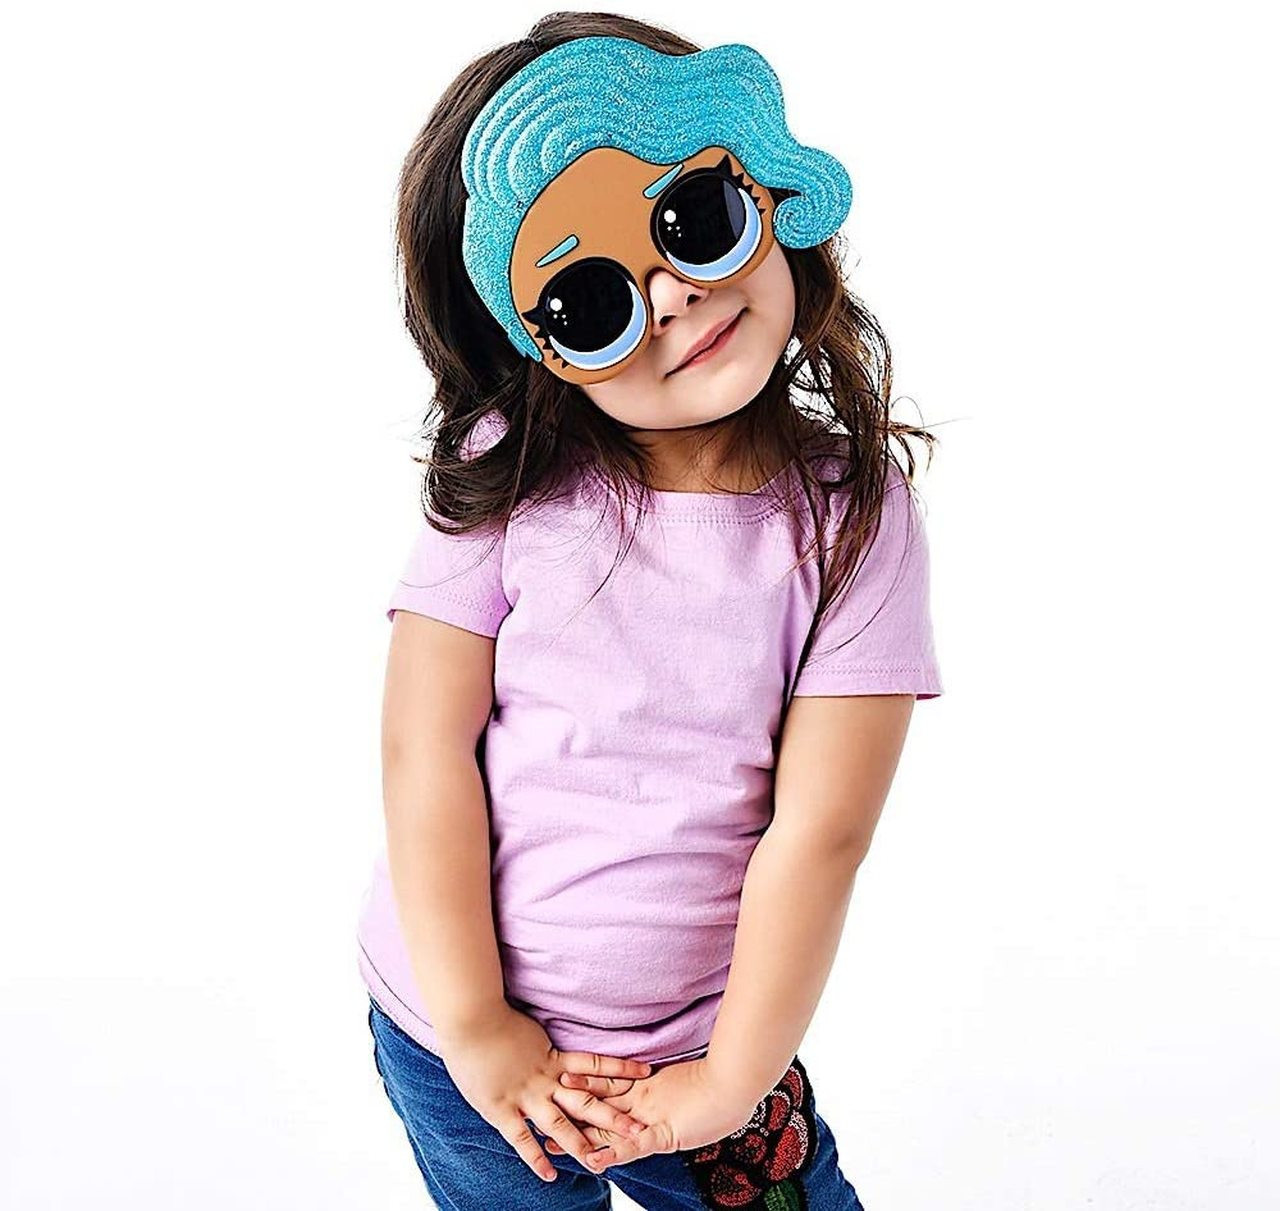 LOL Surprise Doll with nice glasses - LOL Surprise Dolls Kids